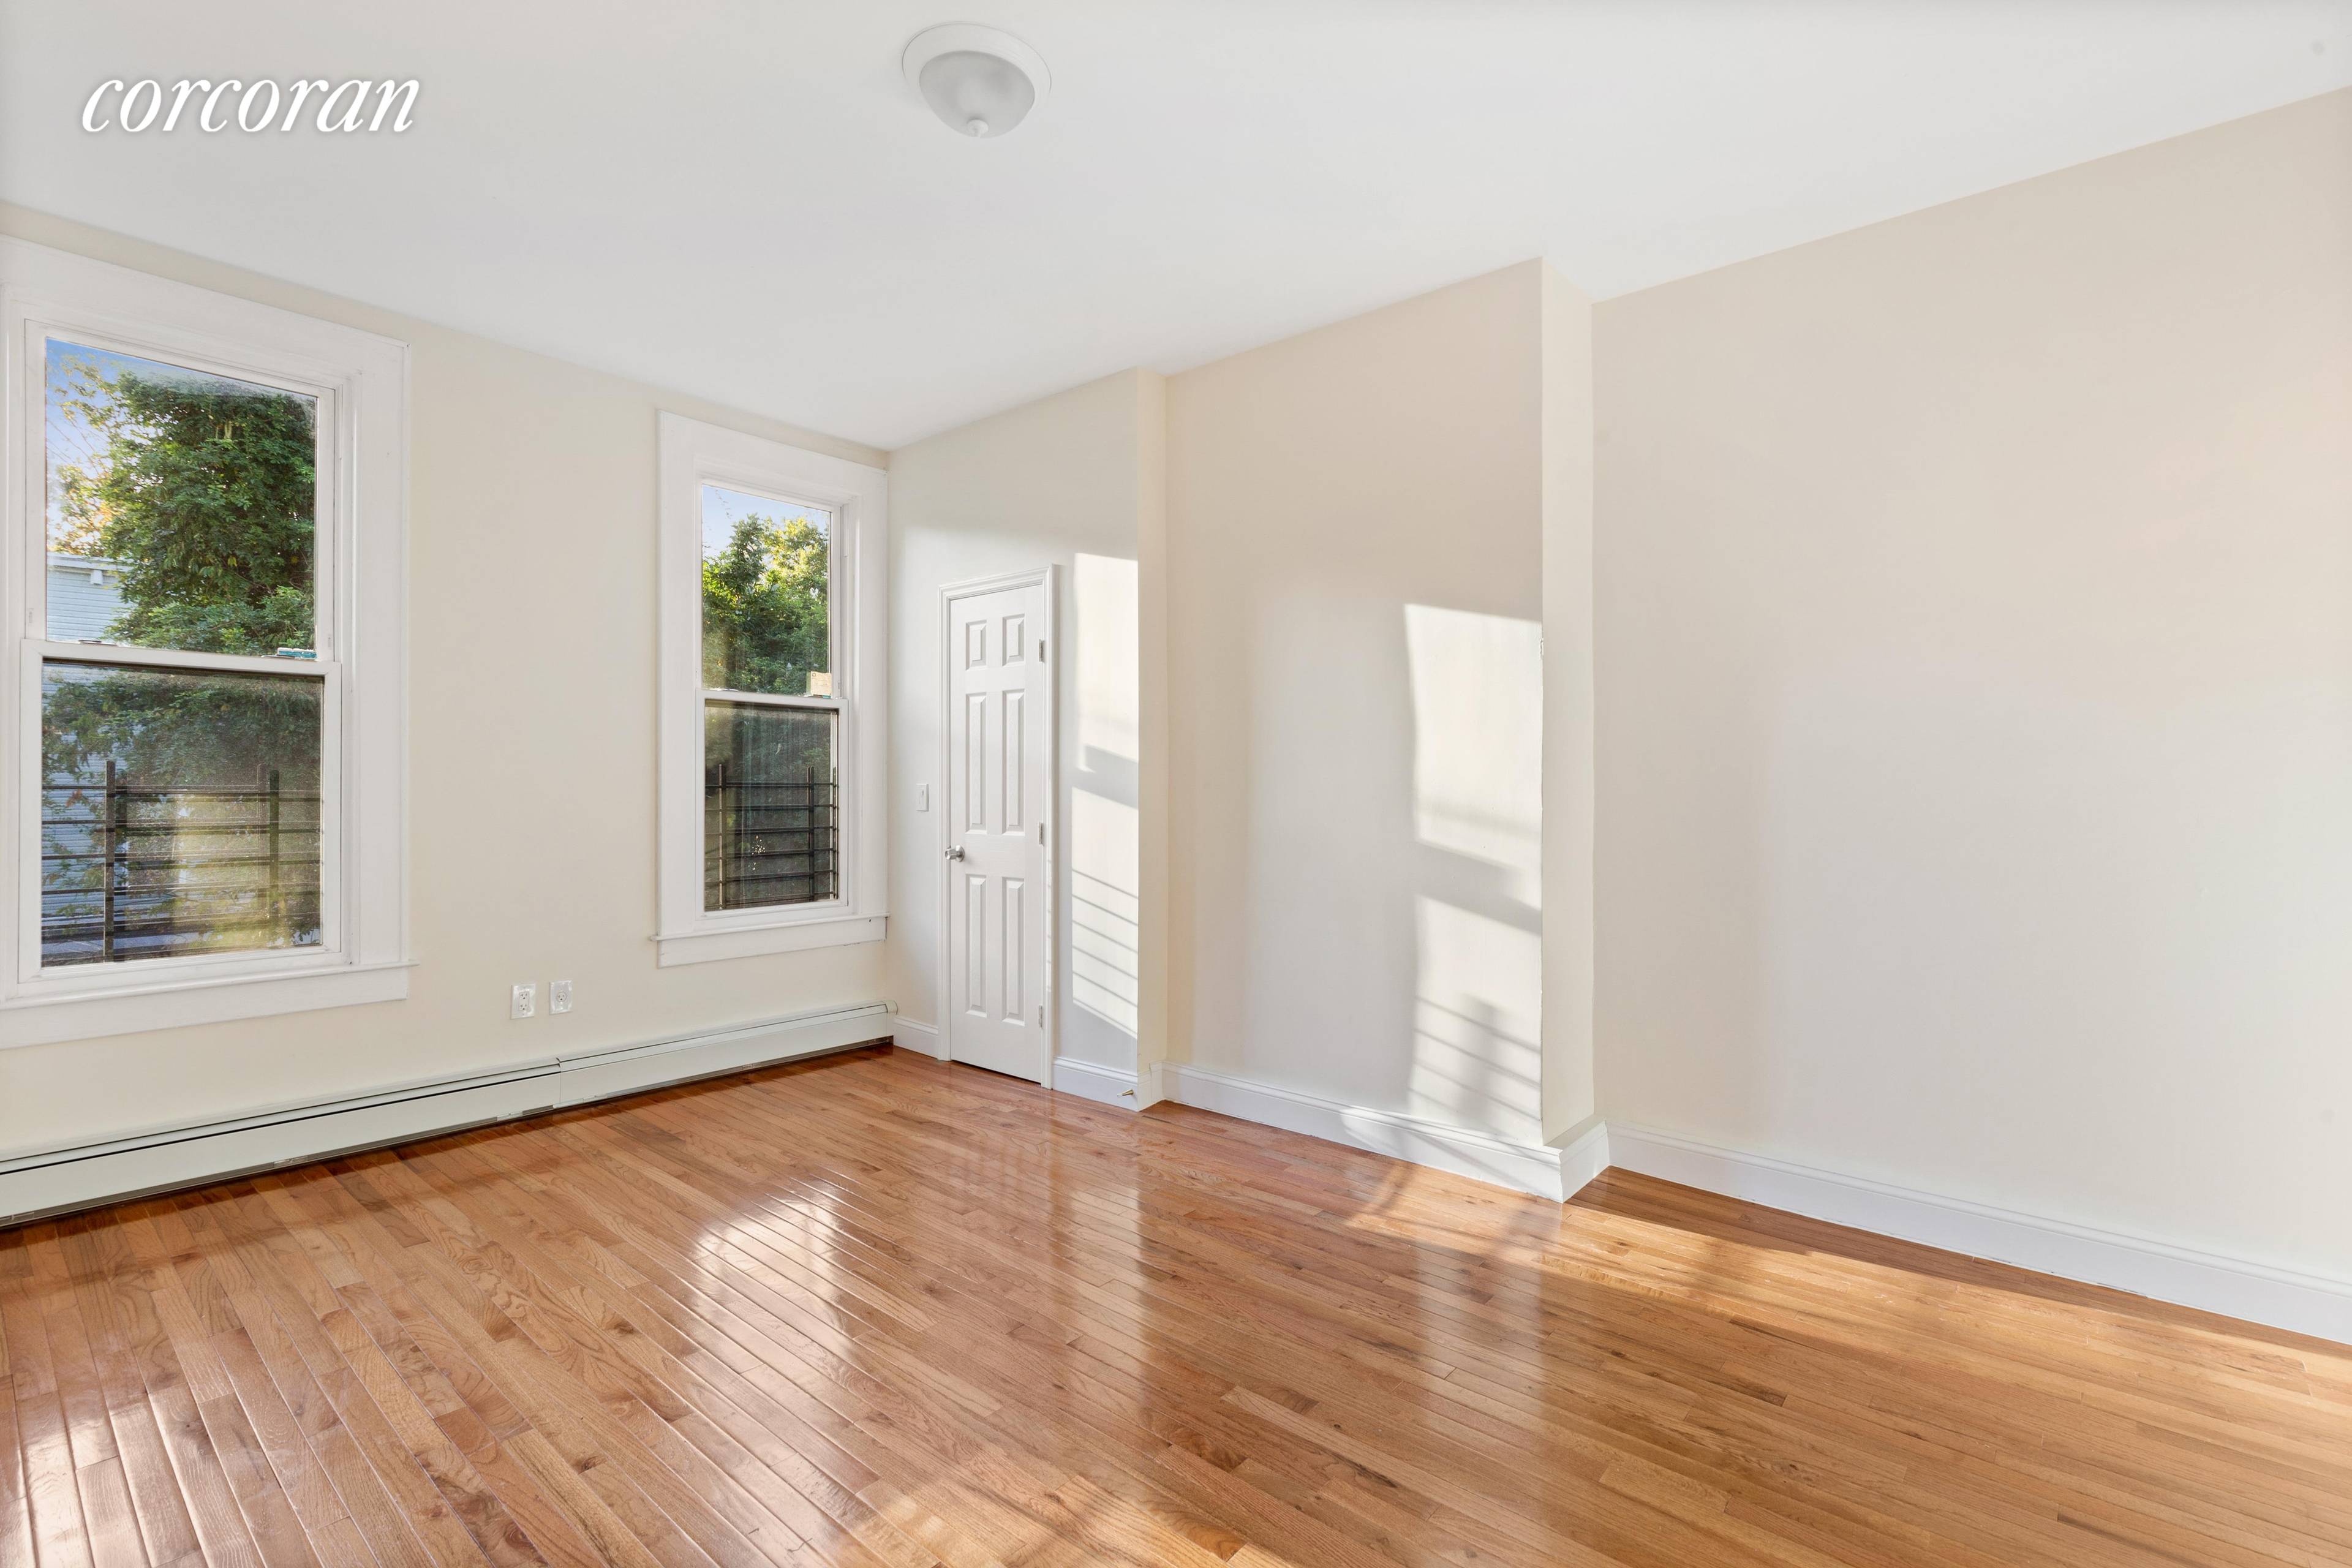 No shortage of charm or an abundance of gleaming light throughout this unit.